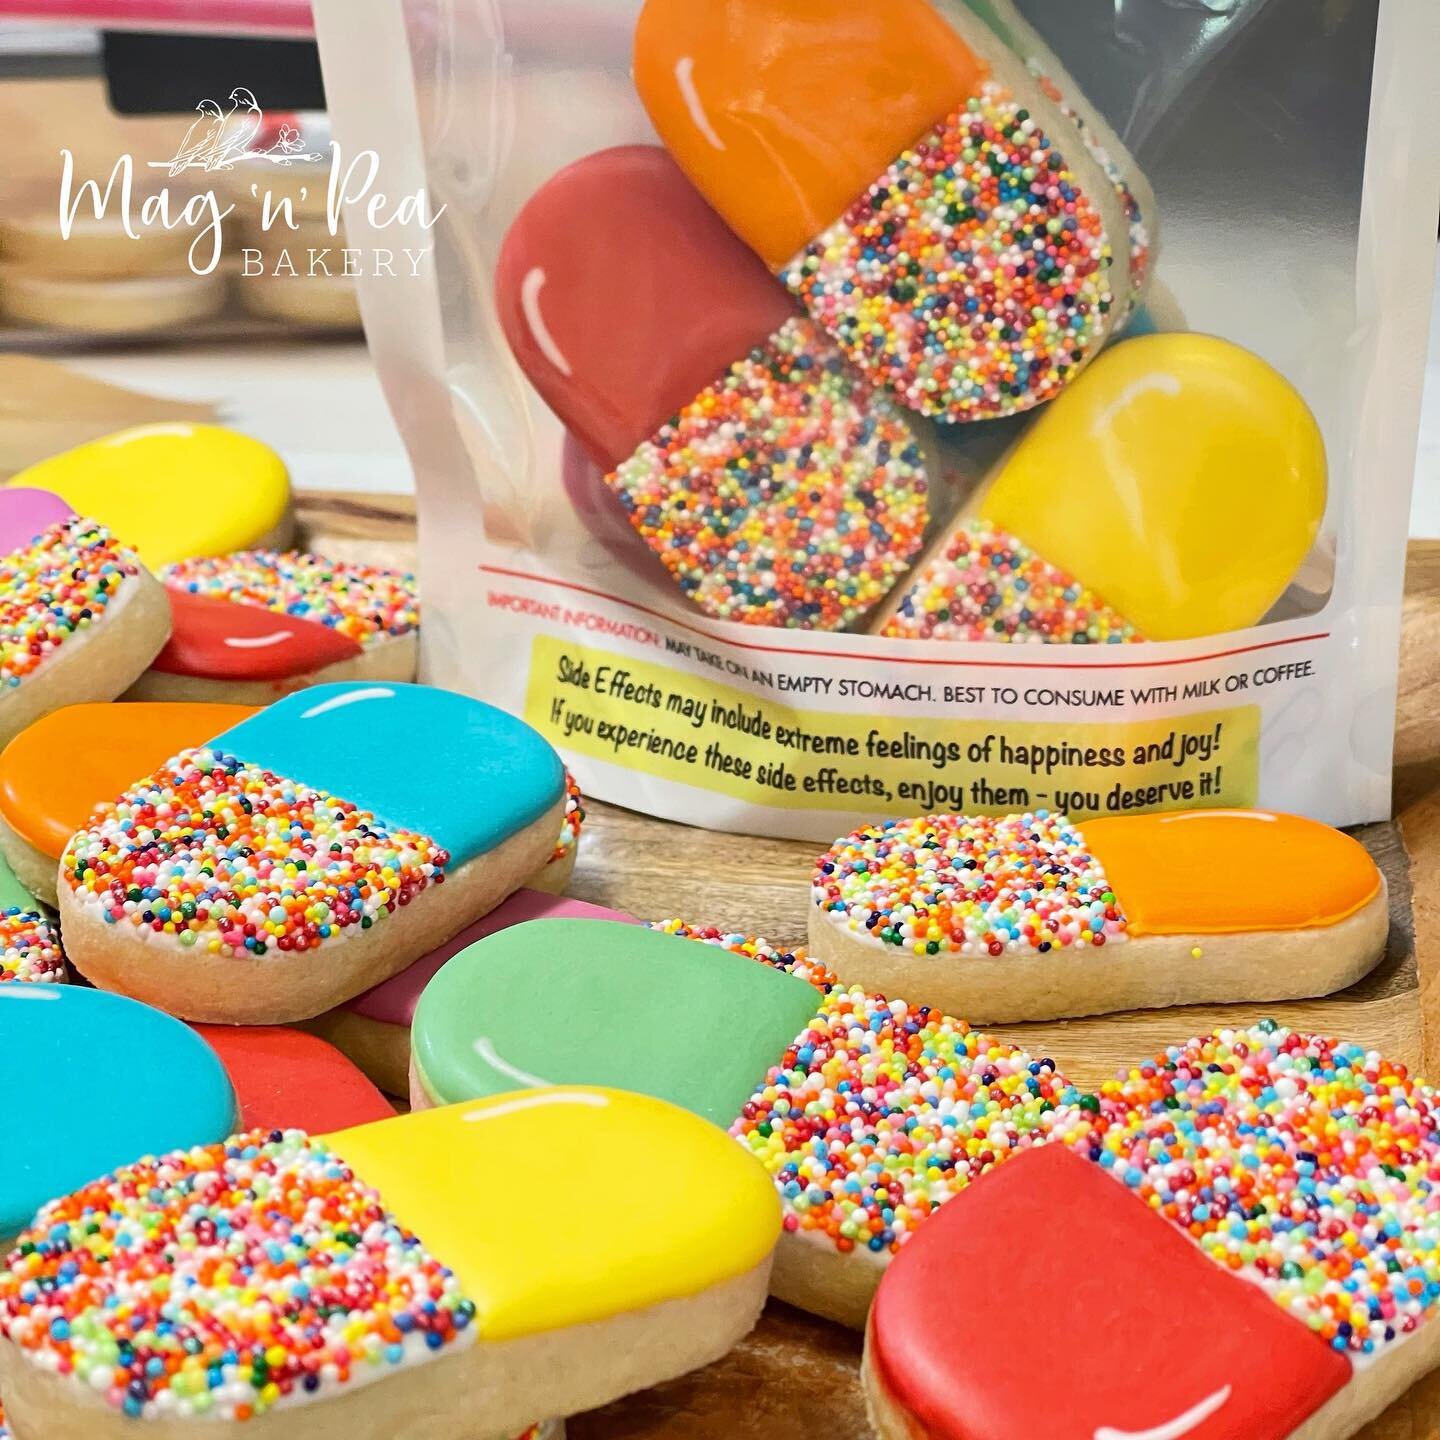 Take twice a day for a week. Call me for refills. 😊

These brightly colored, custom-mixed sprinkled and perfectly sized cookies are sure to lift anyone&rsquo;s spirits. 

#magnpeabakerycookies 
#magnpeabakery 
#customcookies 
#customcookiessacrament